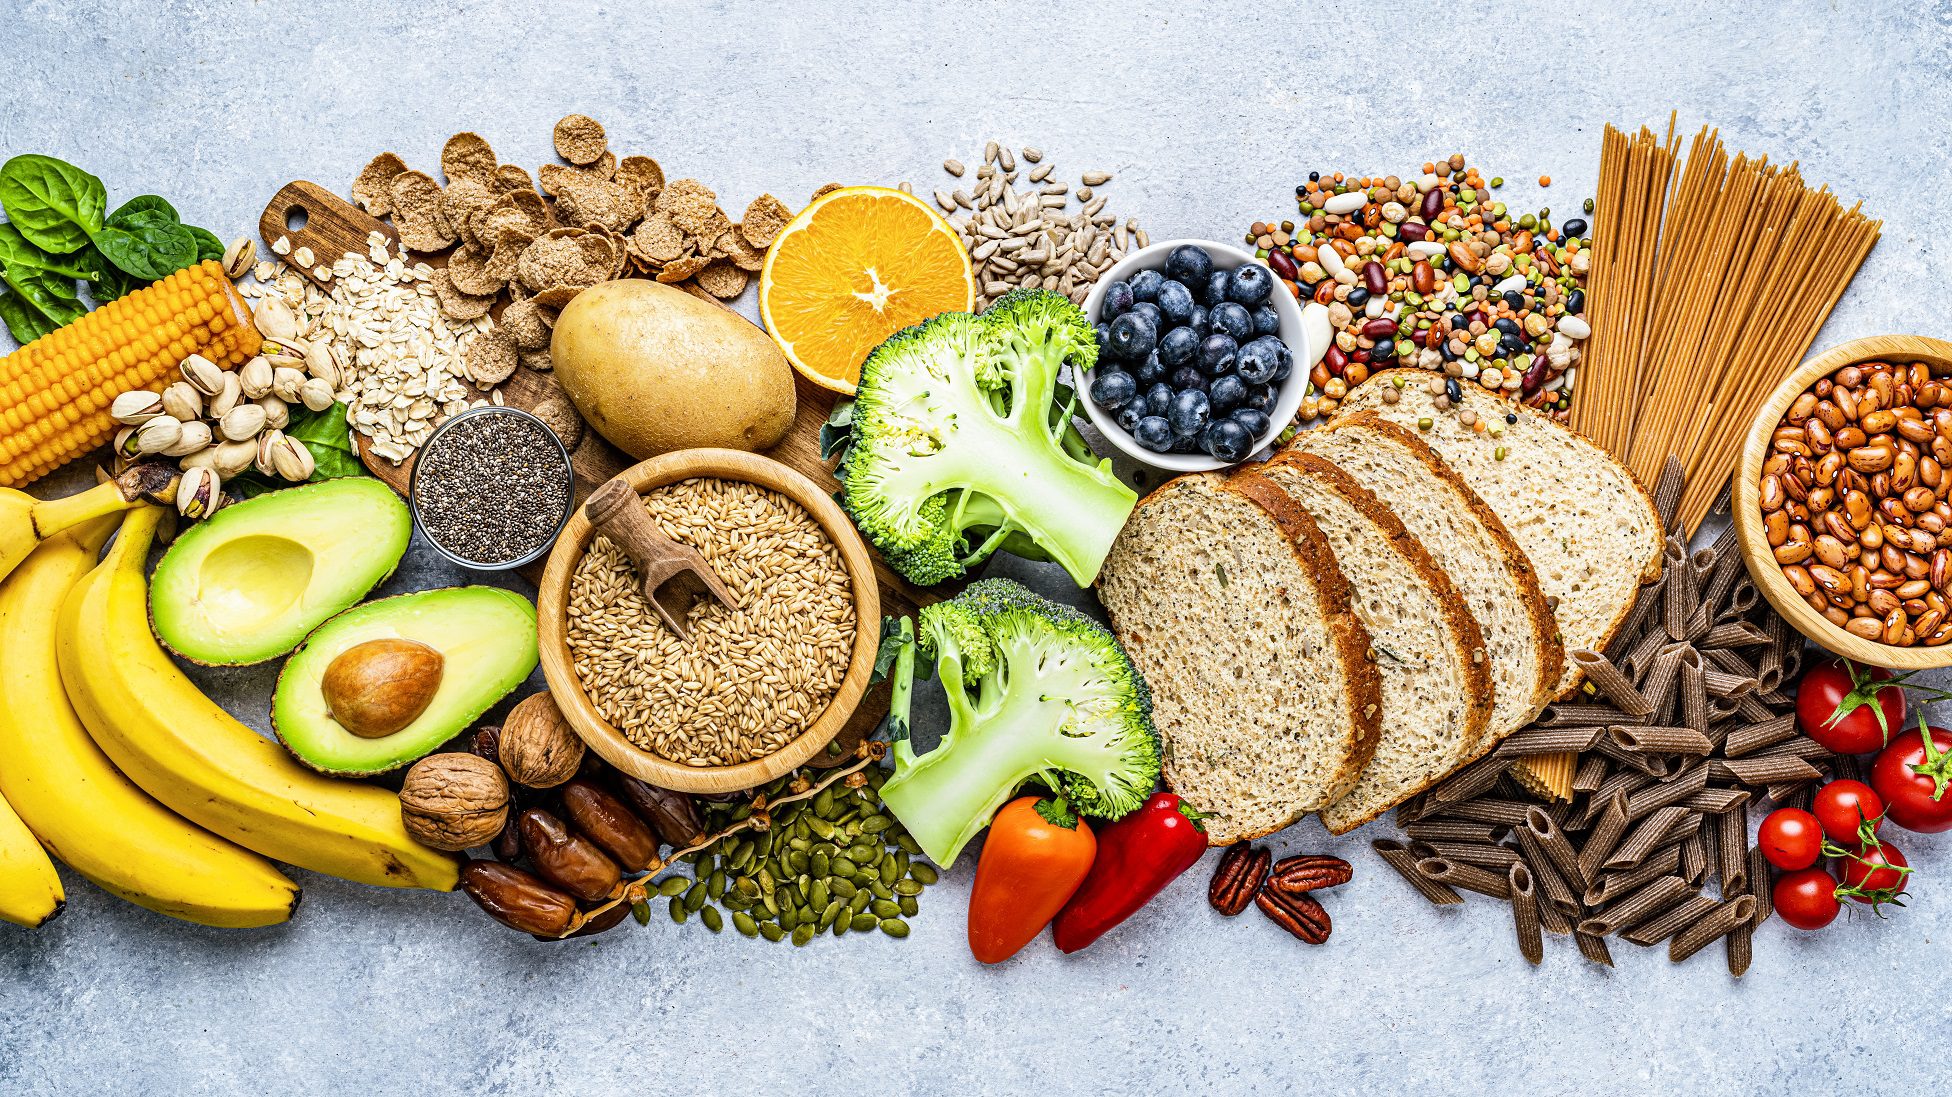 Fiber—Are You Getting Enough?